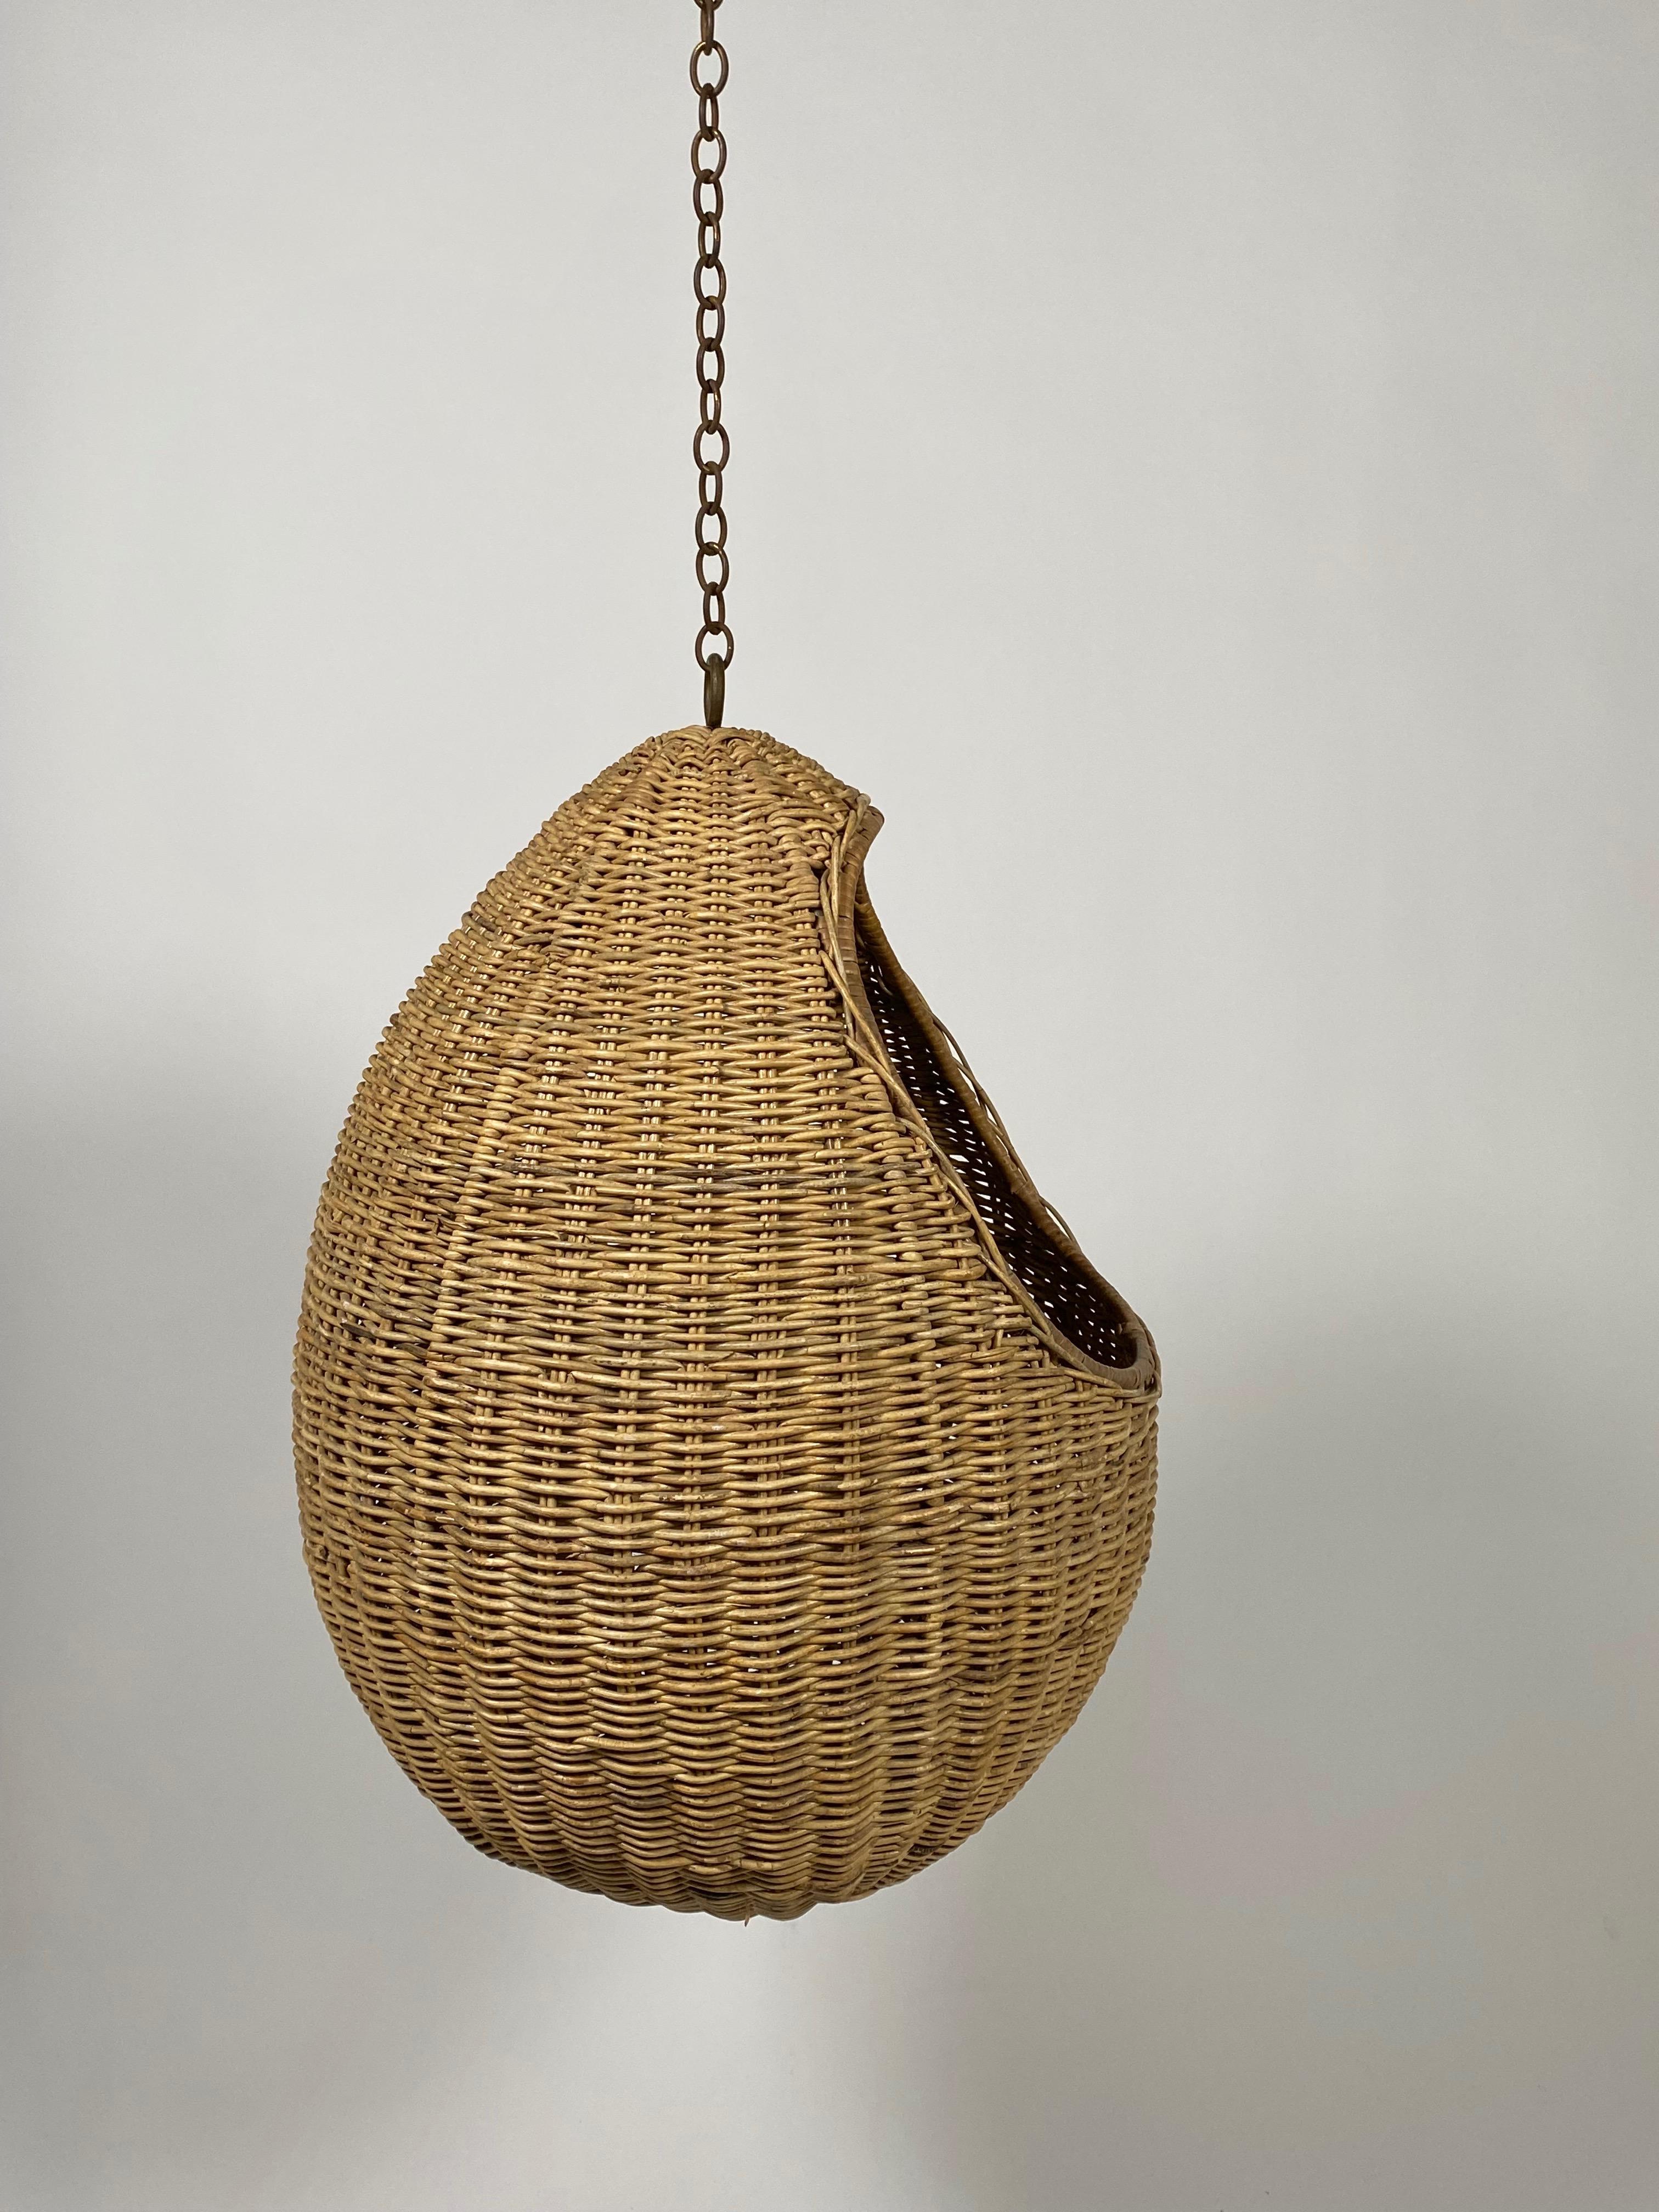 Mid-Century Modern 1960s, Hanging Teardrop Shaped Rattan Cat House / Bed